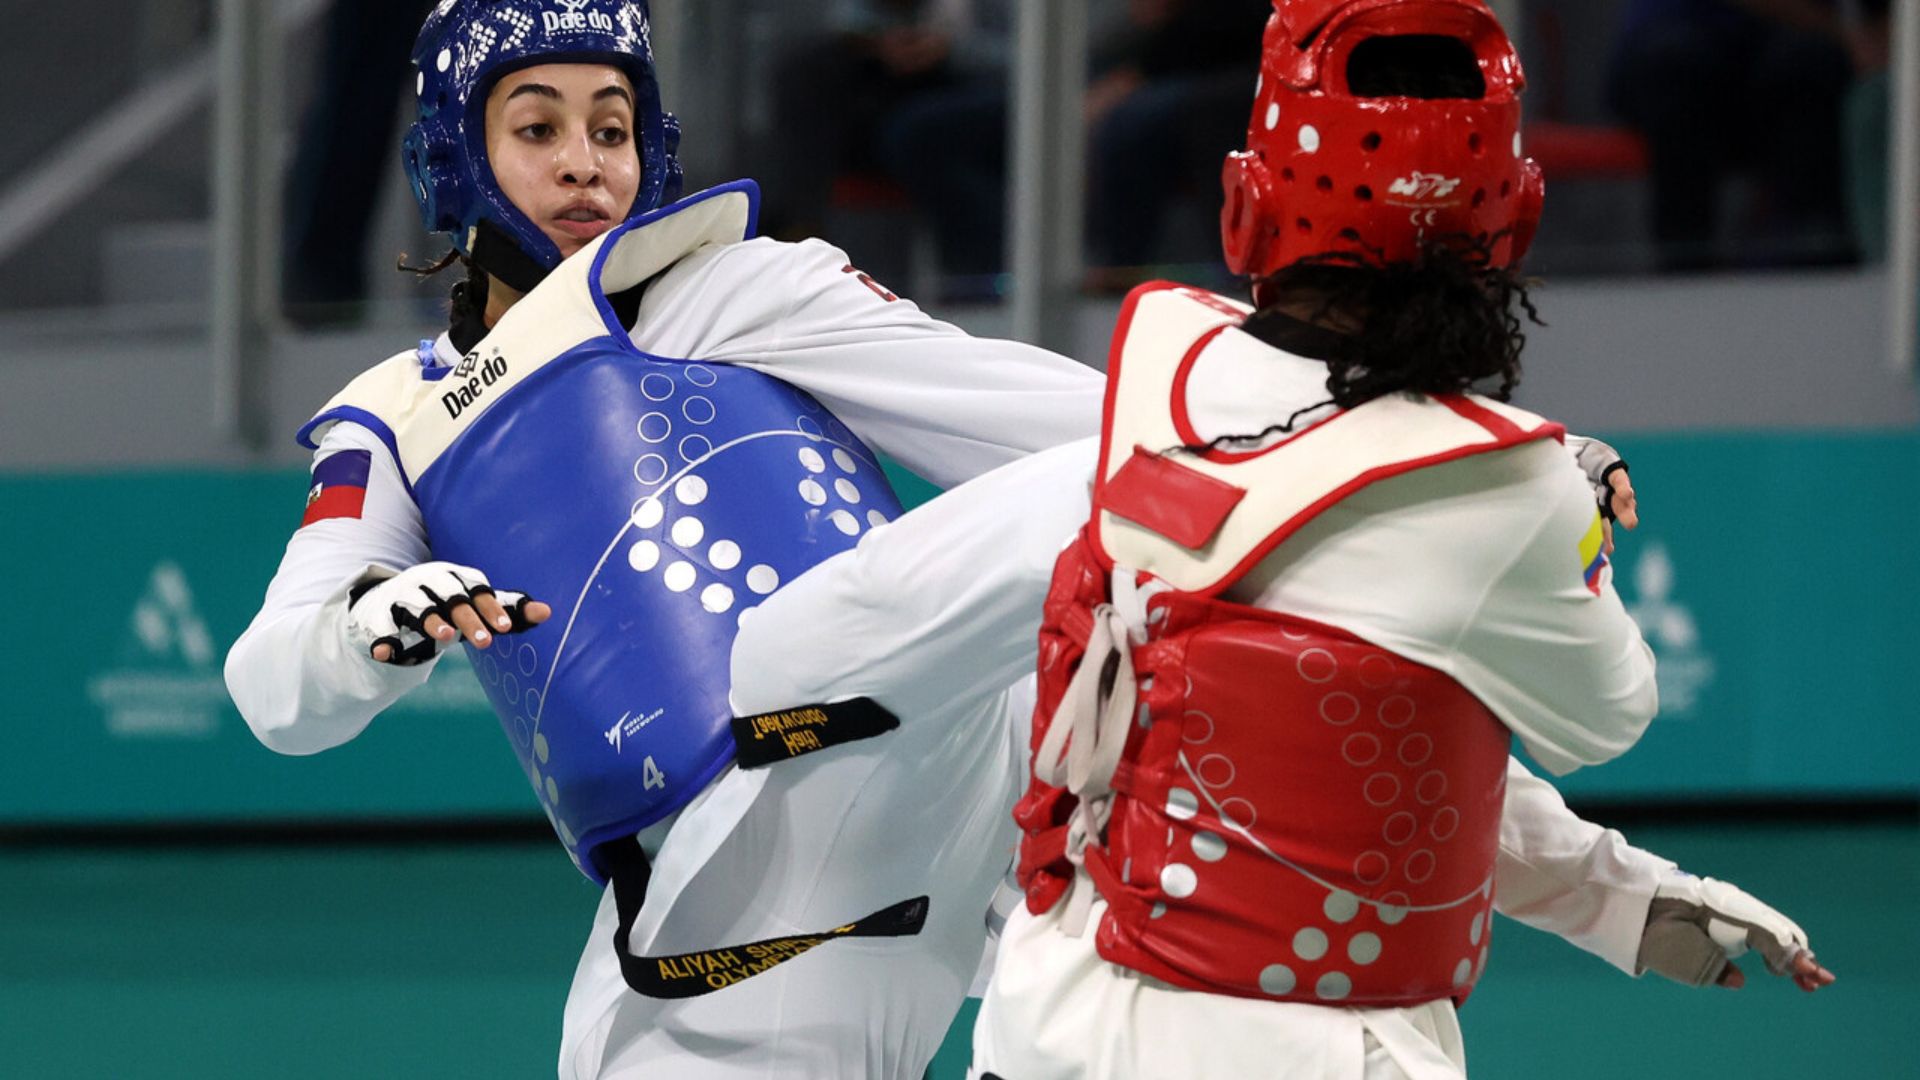 Haiti continues to make history in Taekwondo, adds second medal